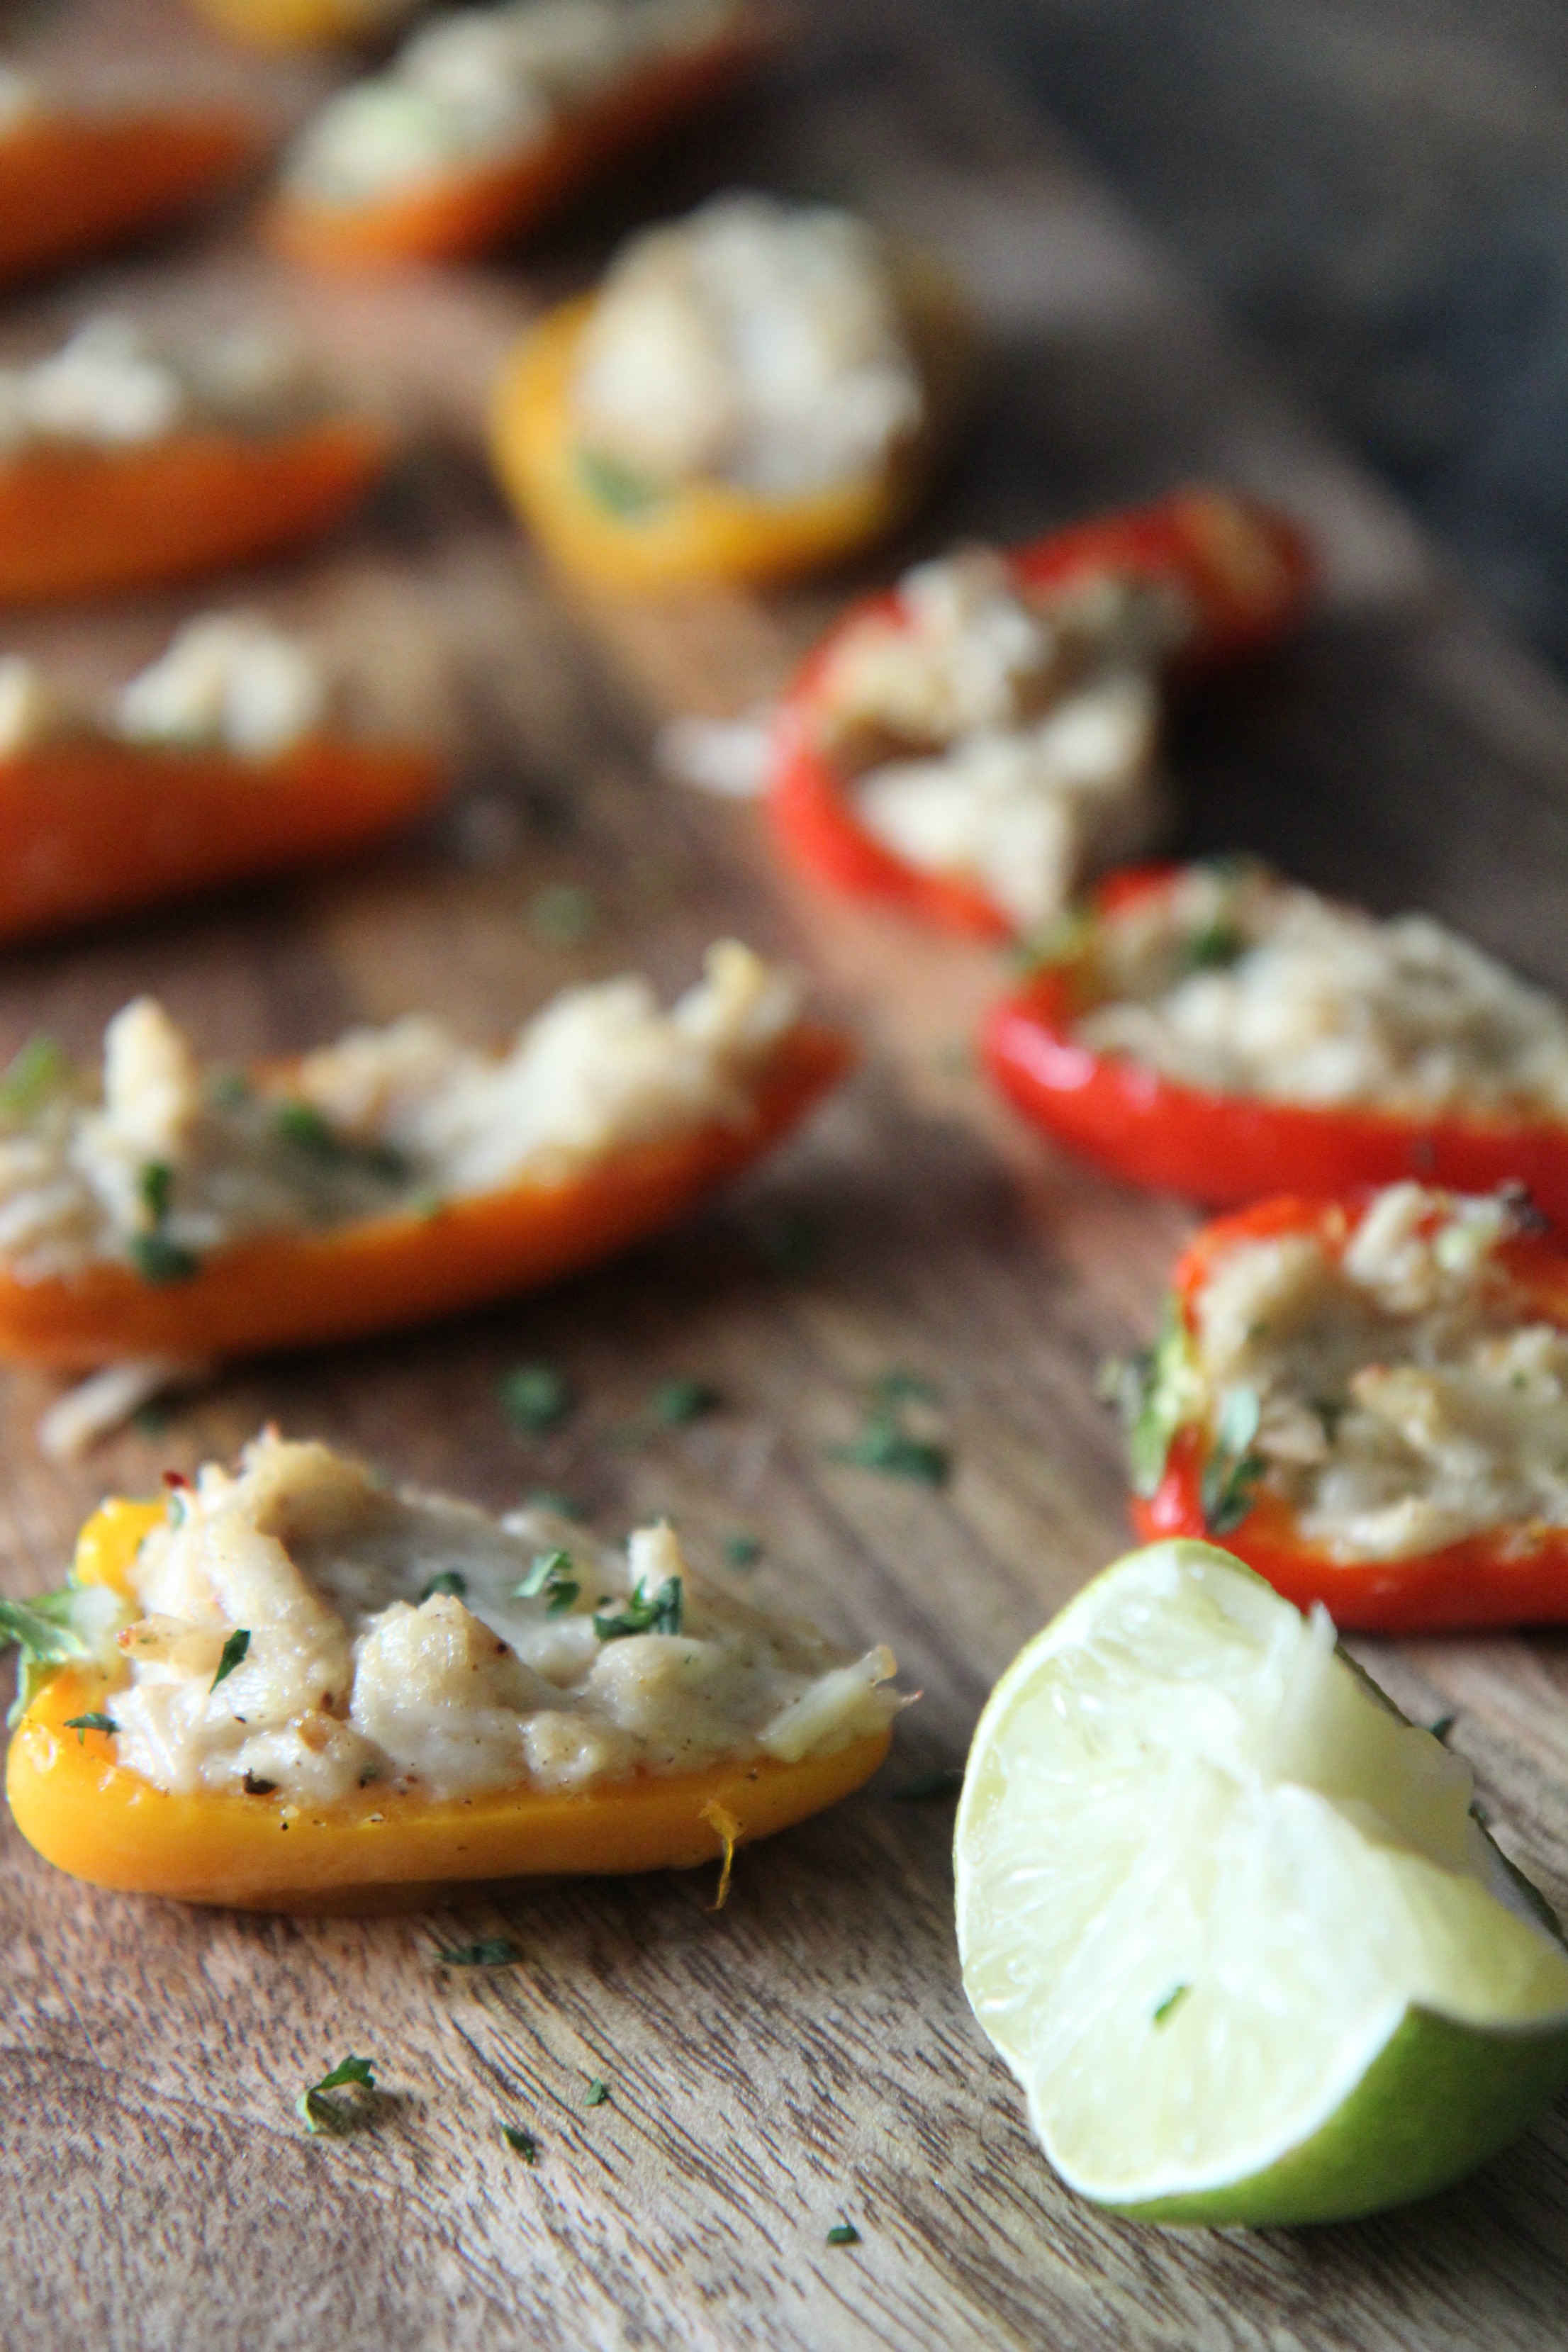 Seafood and spicy bell peppers are a match made in heaven as these appetizers are sure to please.